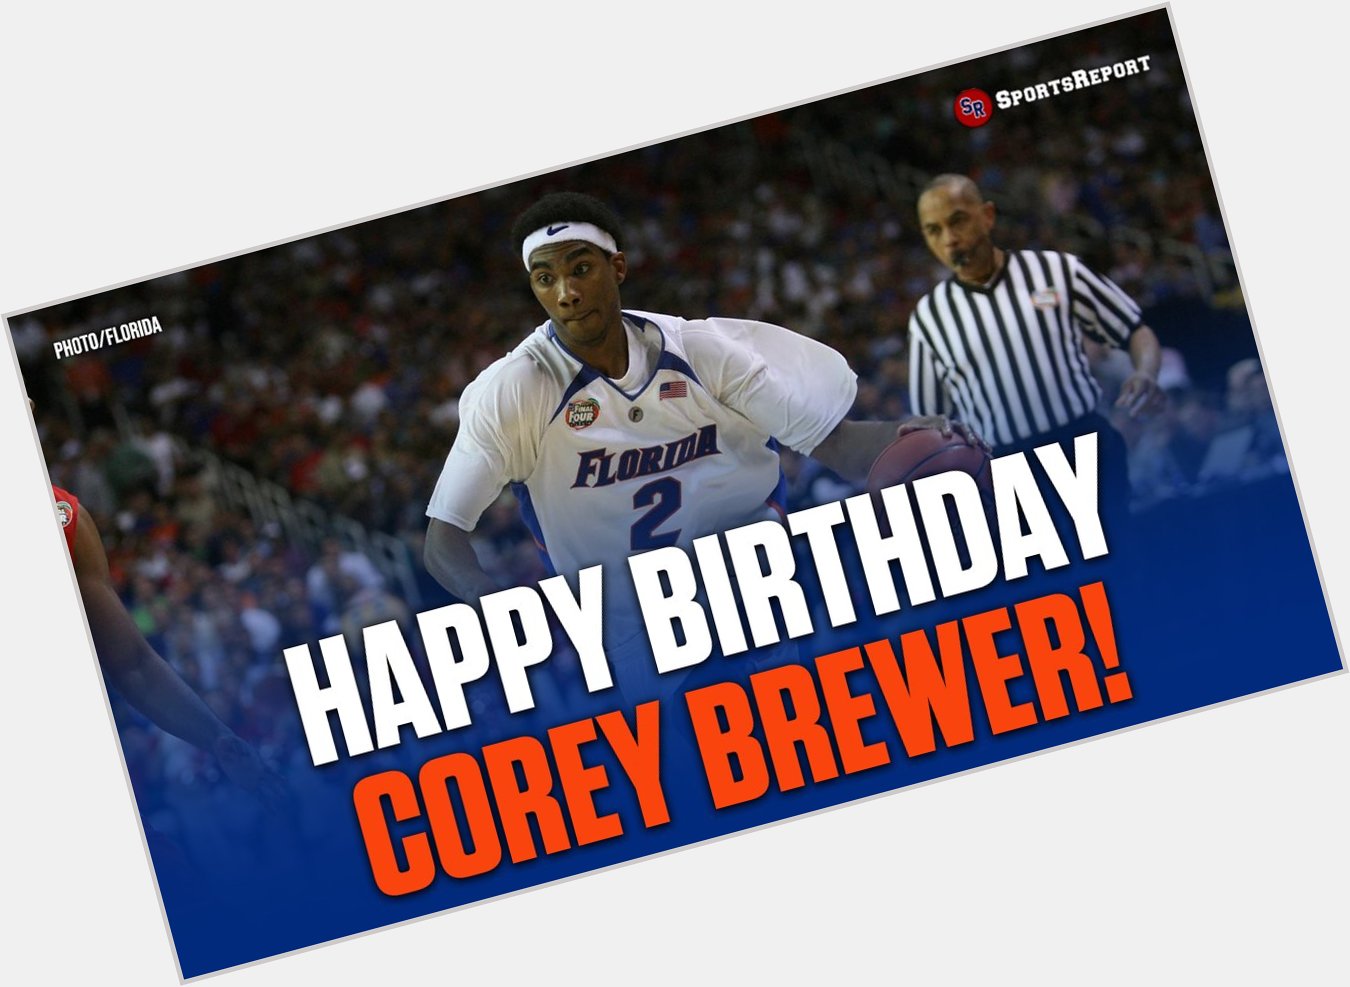  Fans, let\s wish great Corey Brewer a Happy Birthday! 